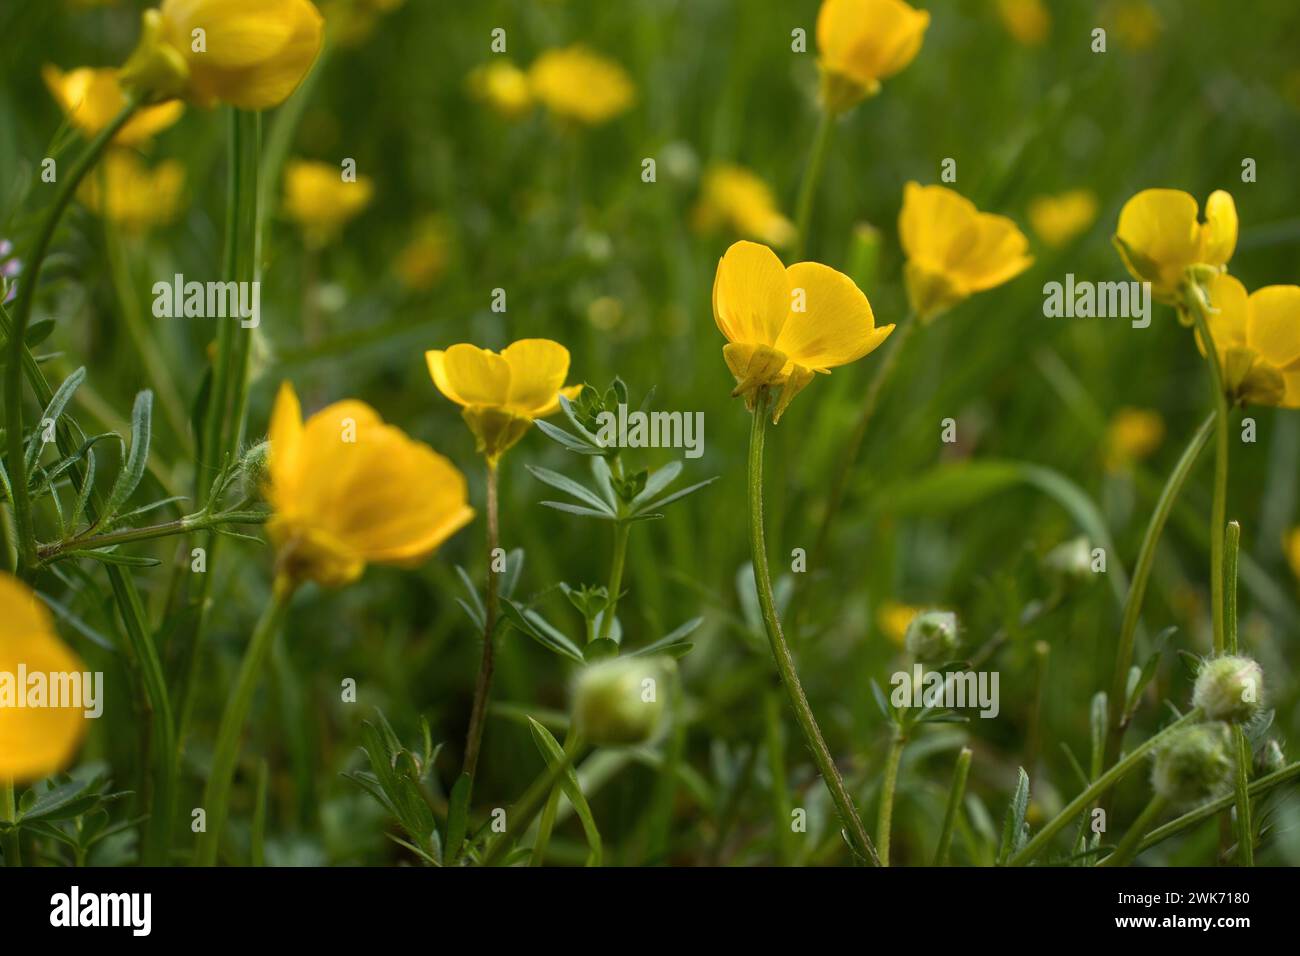 Small, delicate yellow flowers growing in a field of green grass on a spring day in Rhineland Palatinate, Germany. Stock Photo